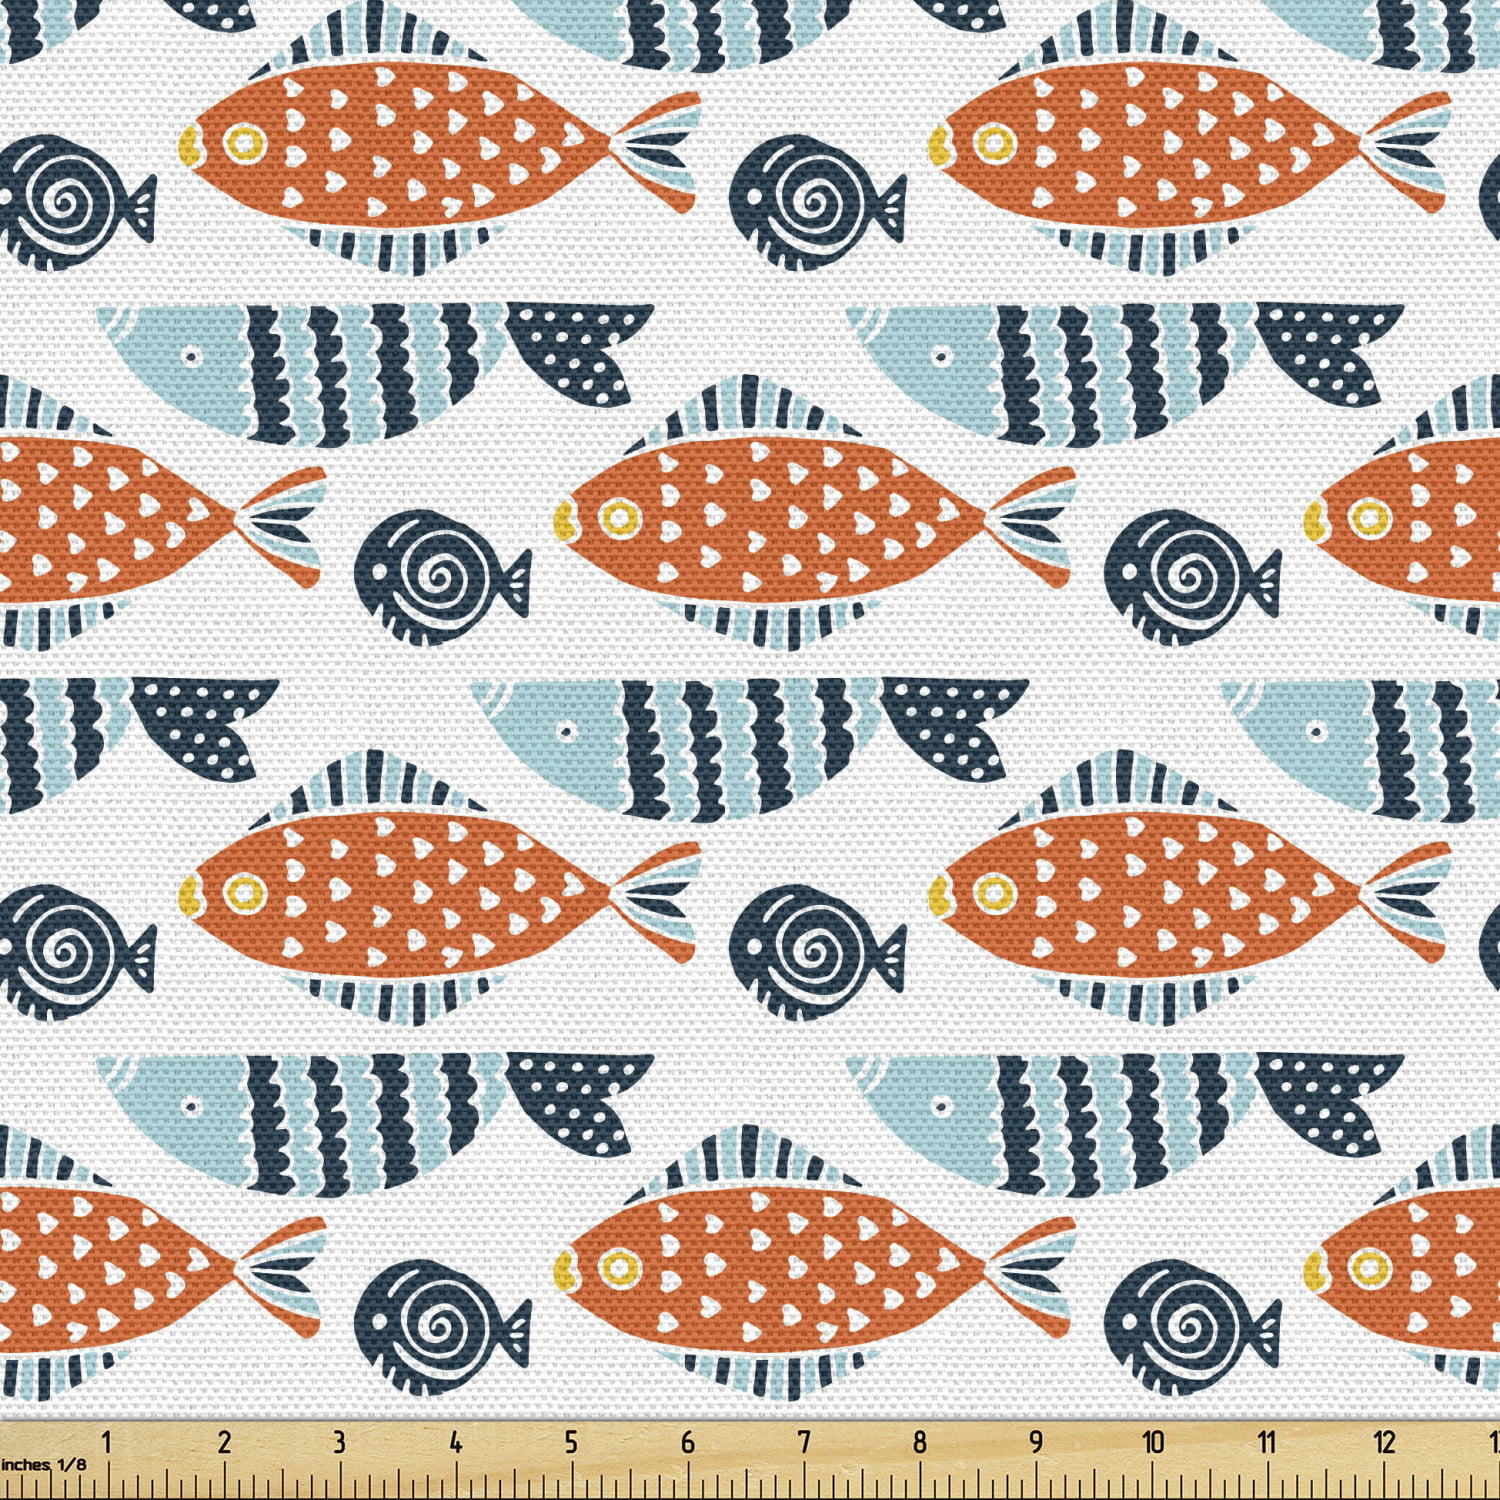 Fish Fabric by the Yard, Pattern with Marine Cartoon Animal, Decorative  Upholstery Fabric for Sofas and Home Accents, White Blue Grey Orange by  Ambesonne 